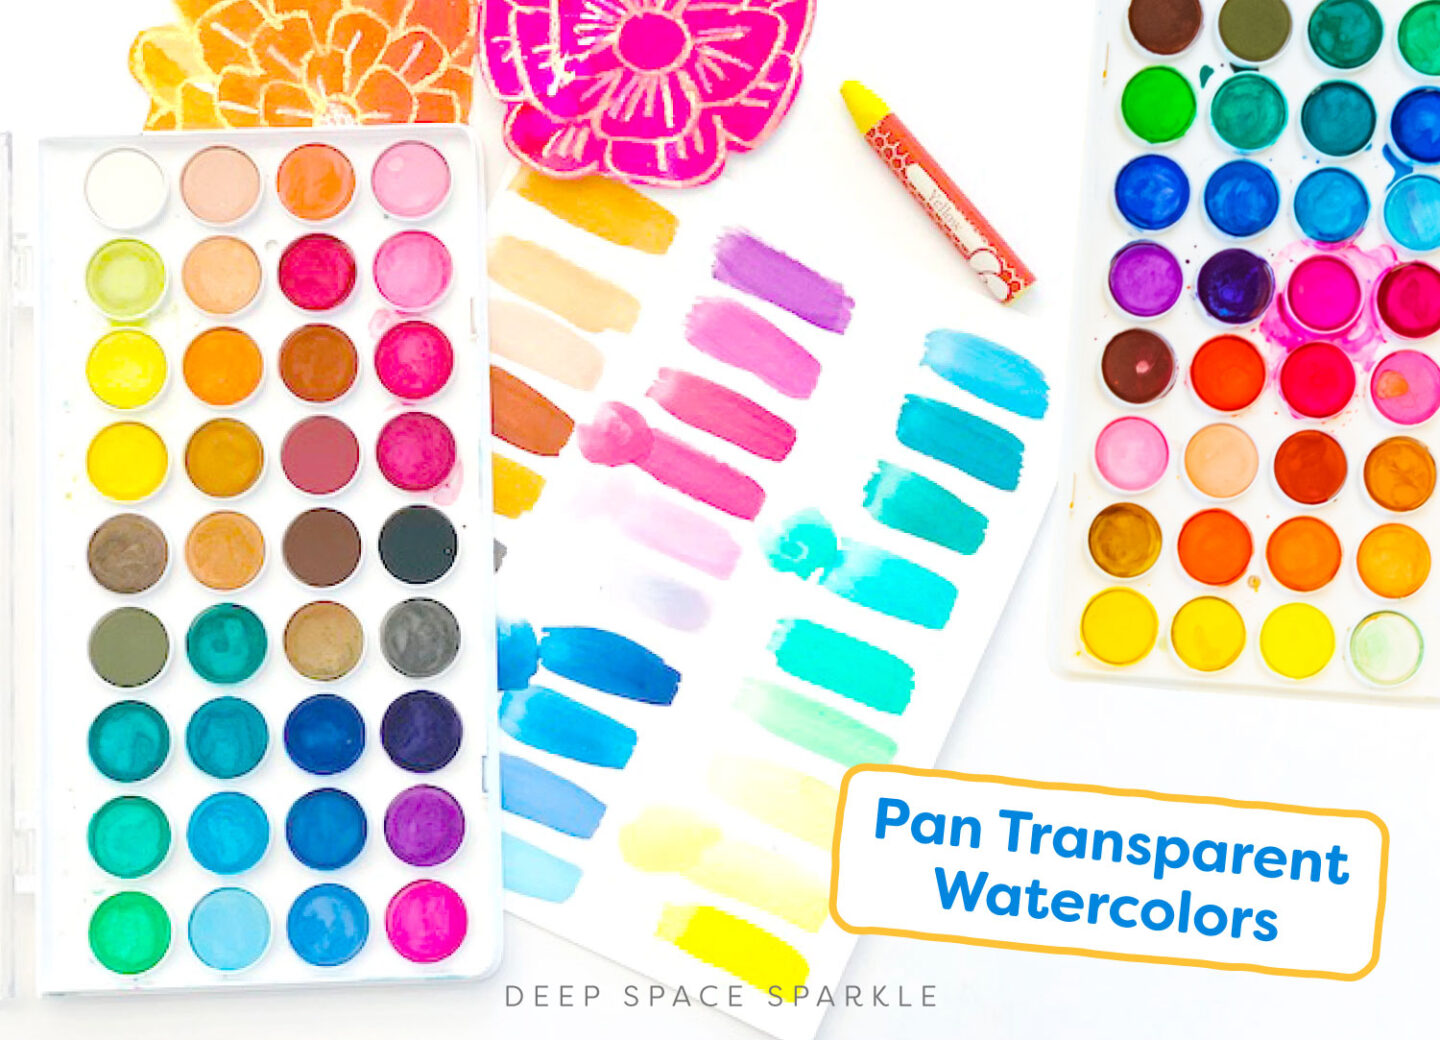 Pan Transparent The Top 5 Watercolor, Colored Pencil and Crayon Sets for Kids